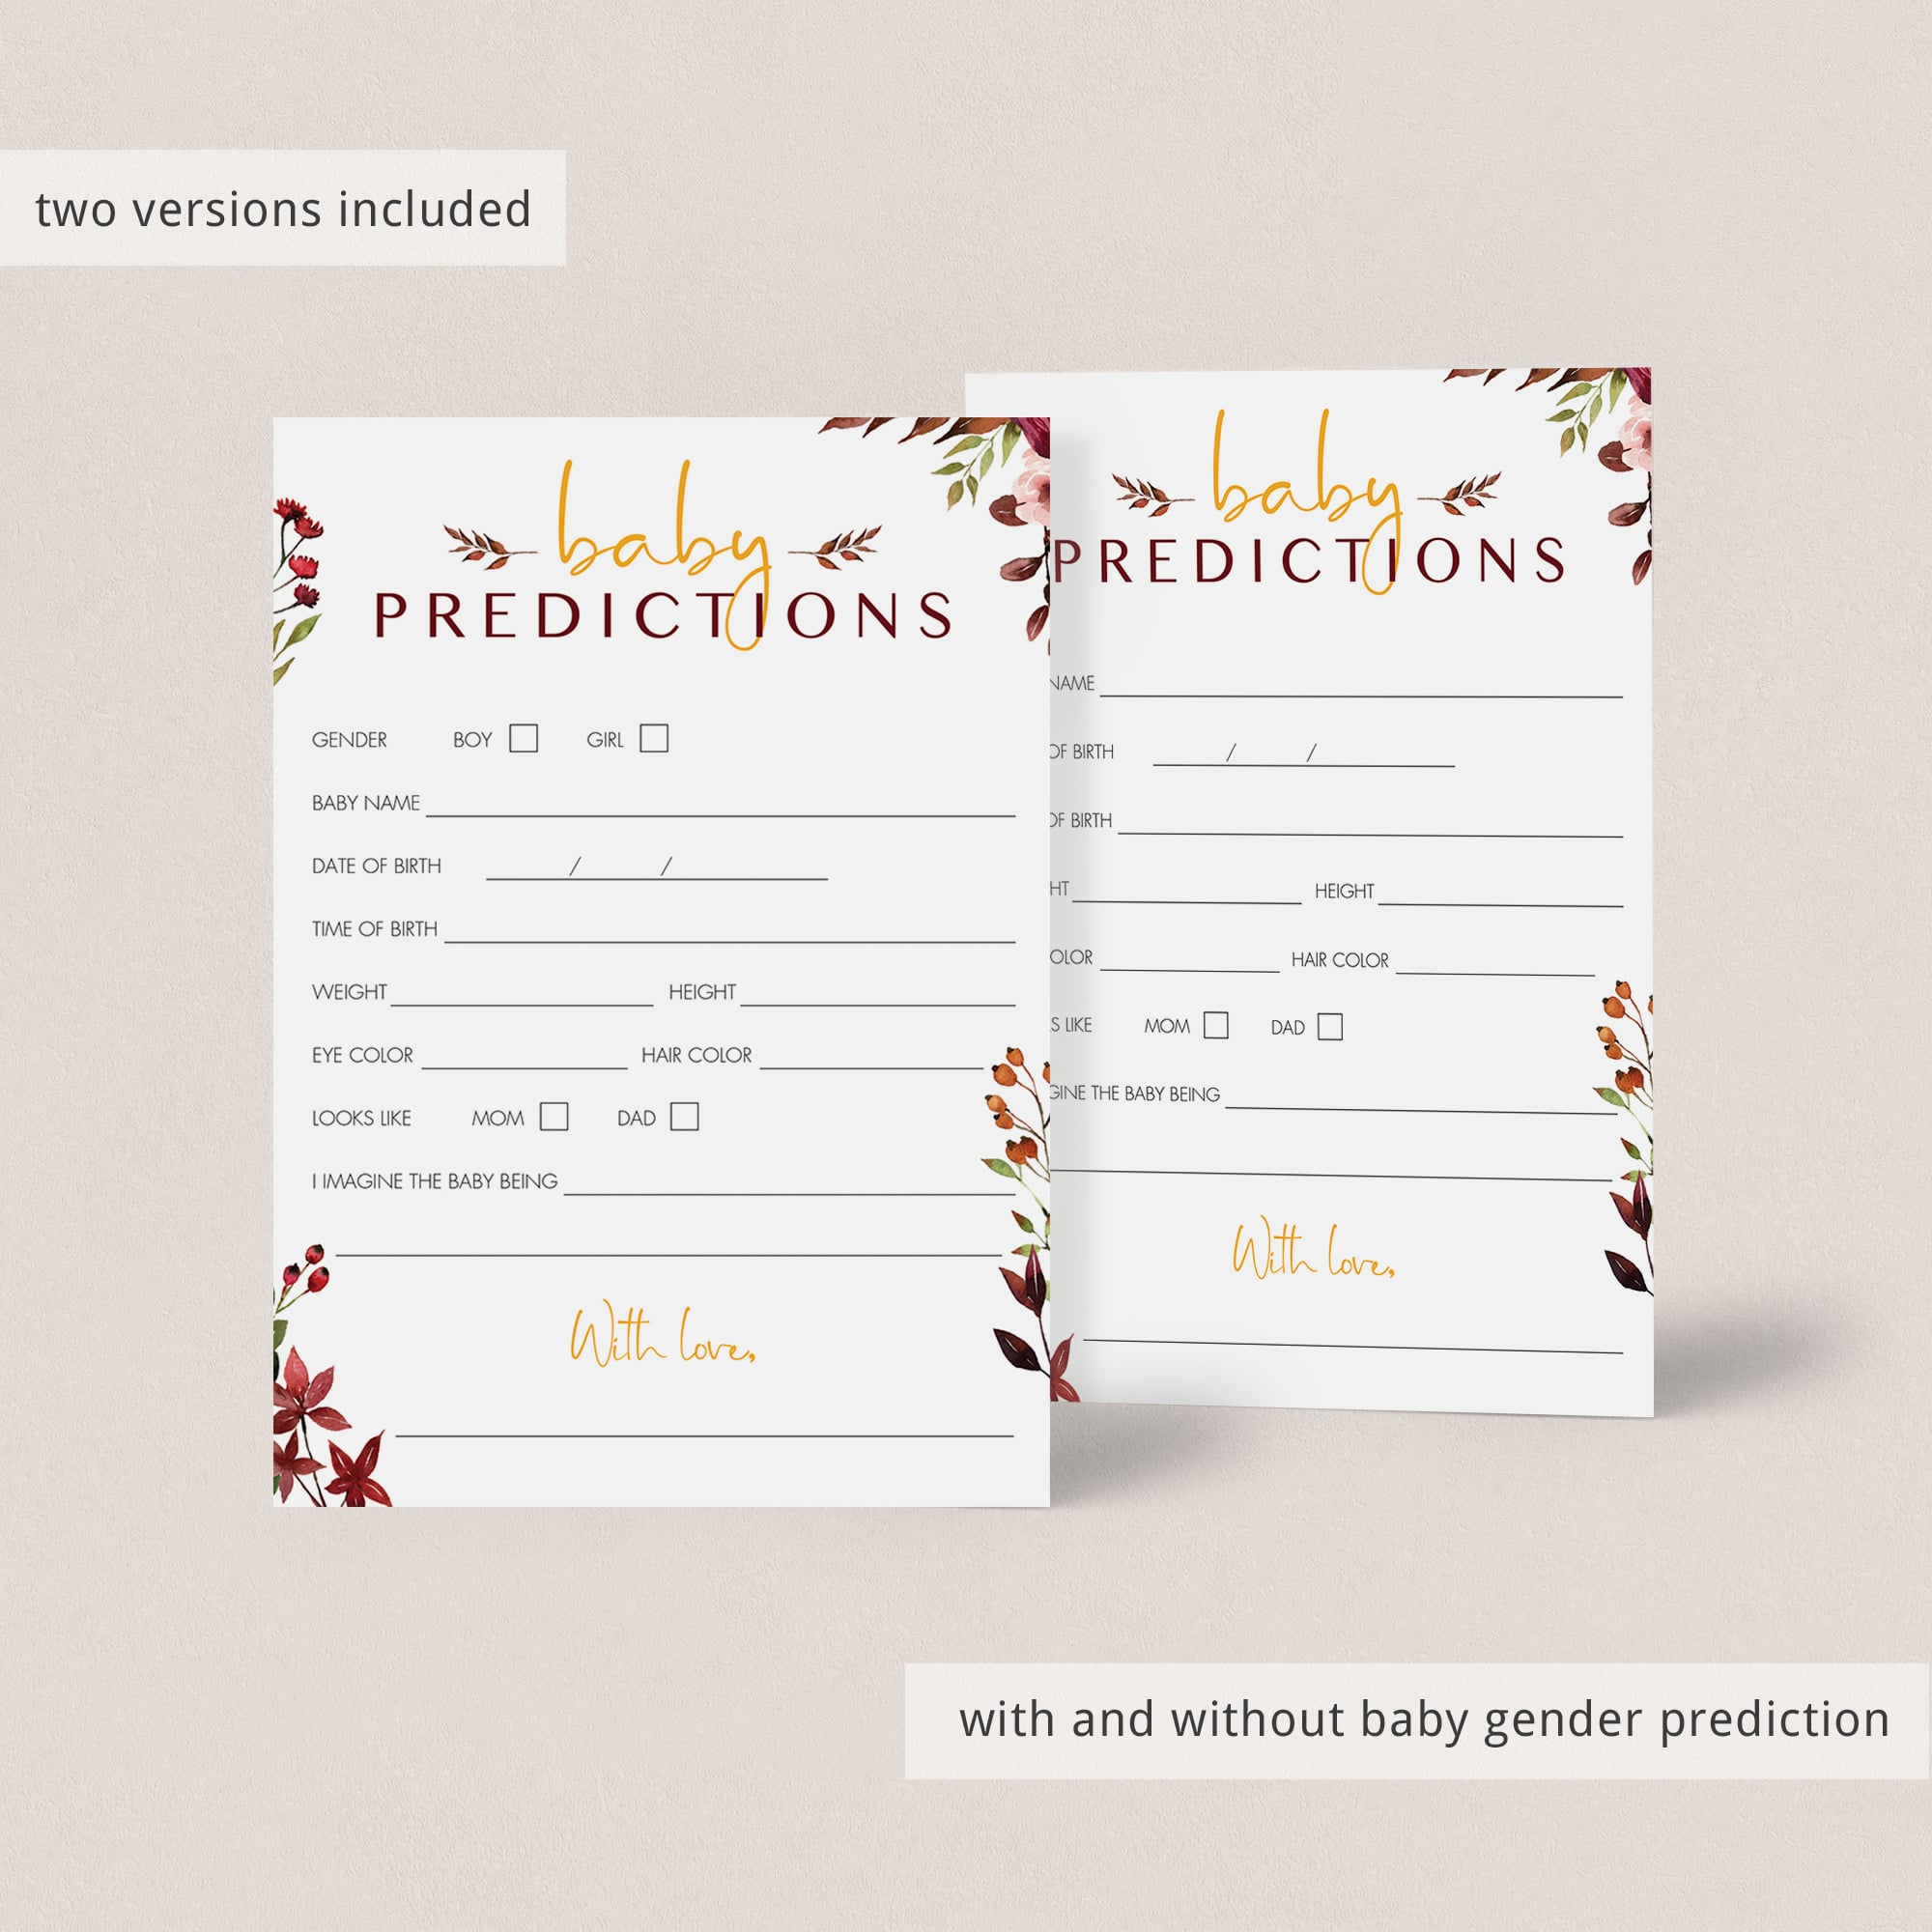 Baby predictions game printable watercolor fall leaves by LittleSizzle